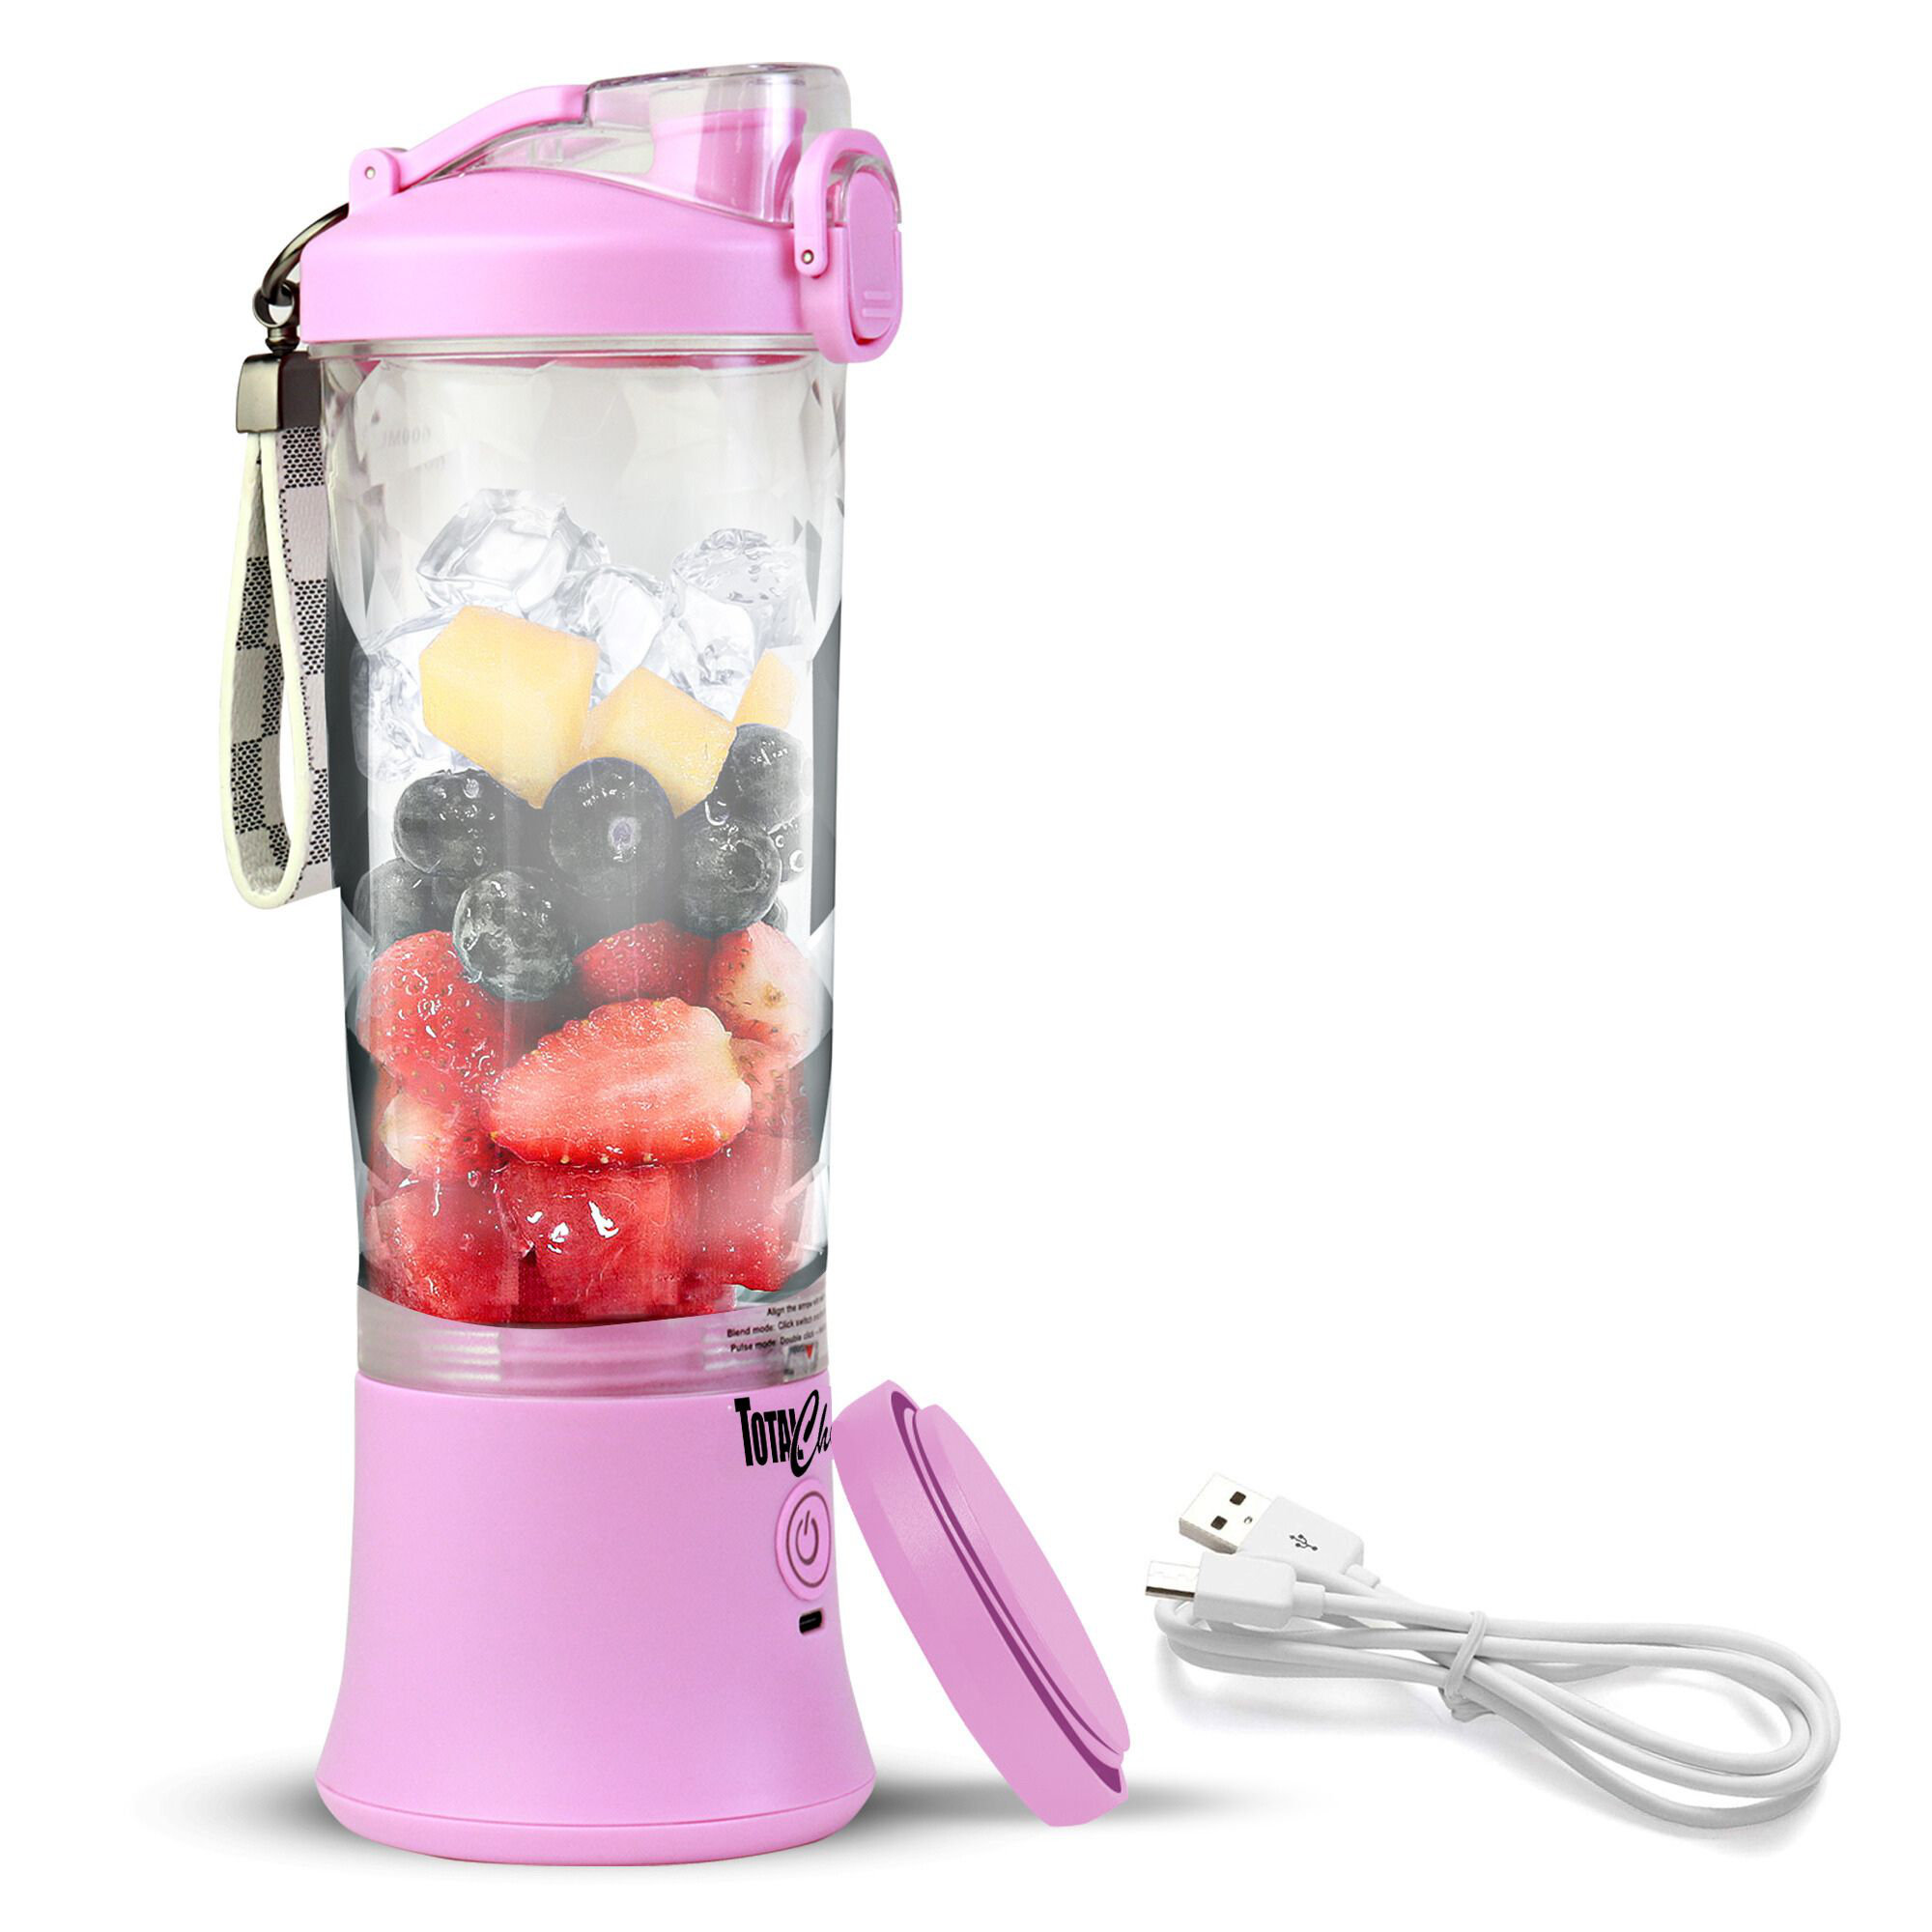 Zulay Portable Blender For Shakes And Smoothies - USB Rechargeable